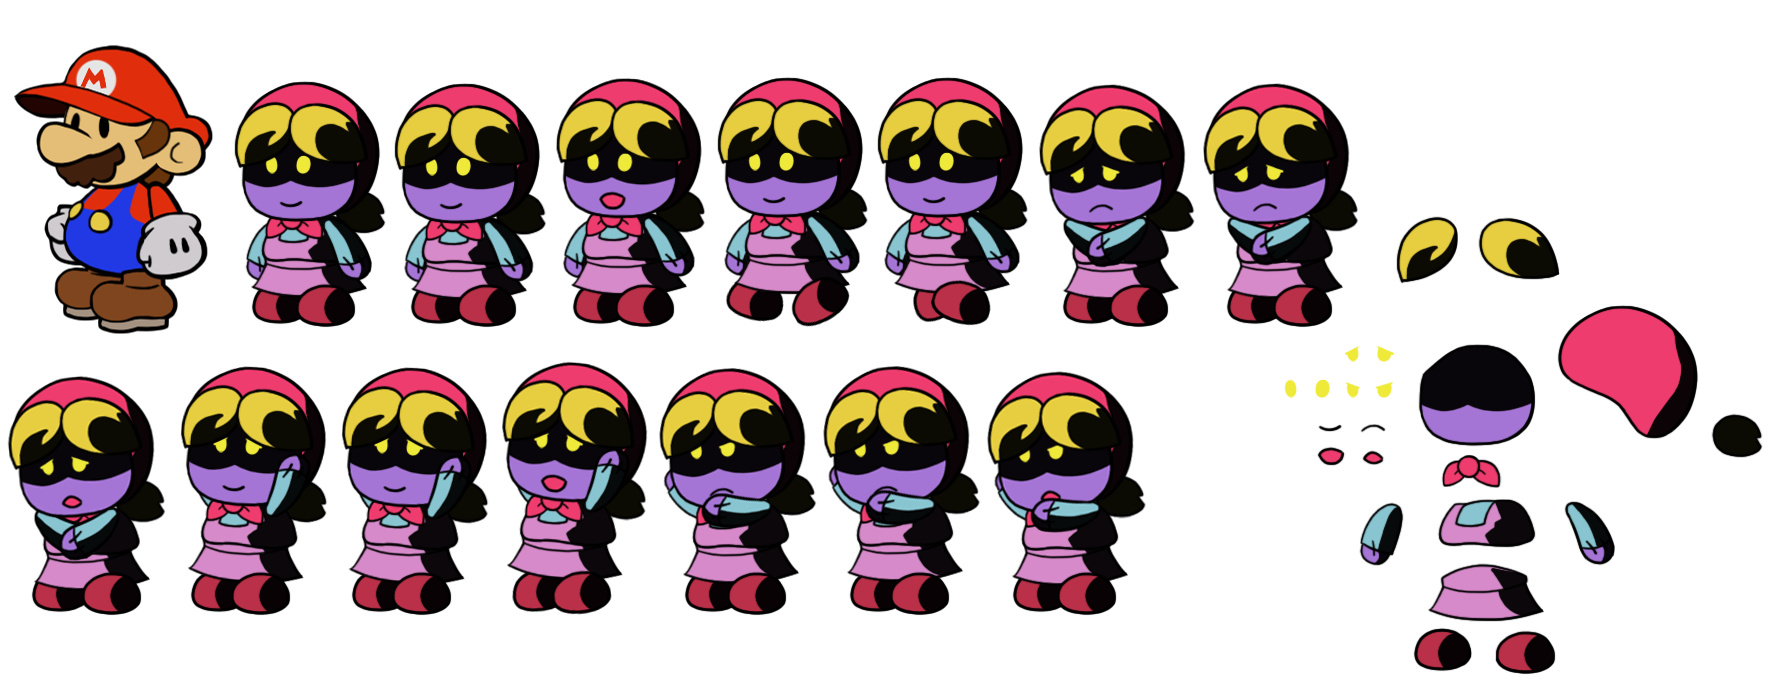 Paper Mario Customs - Twilight Town Shopkeeper's Wife (Paper Mario-Style)